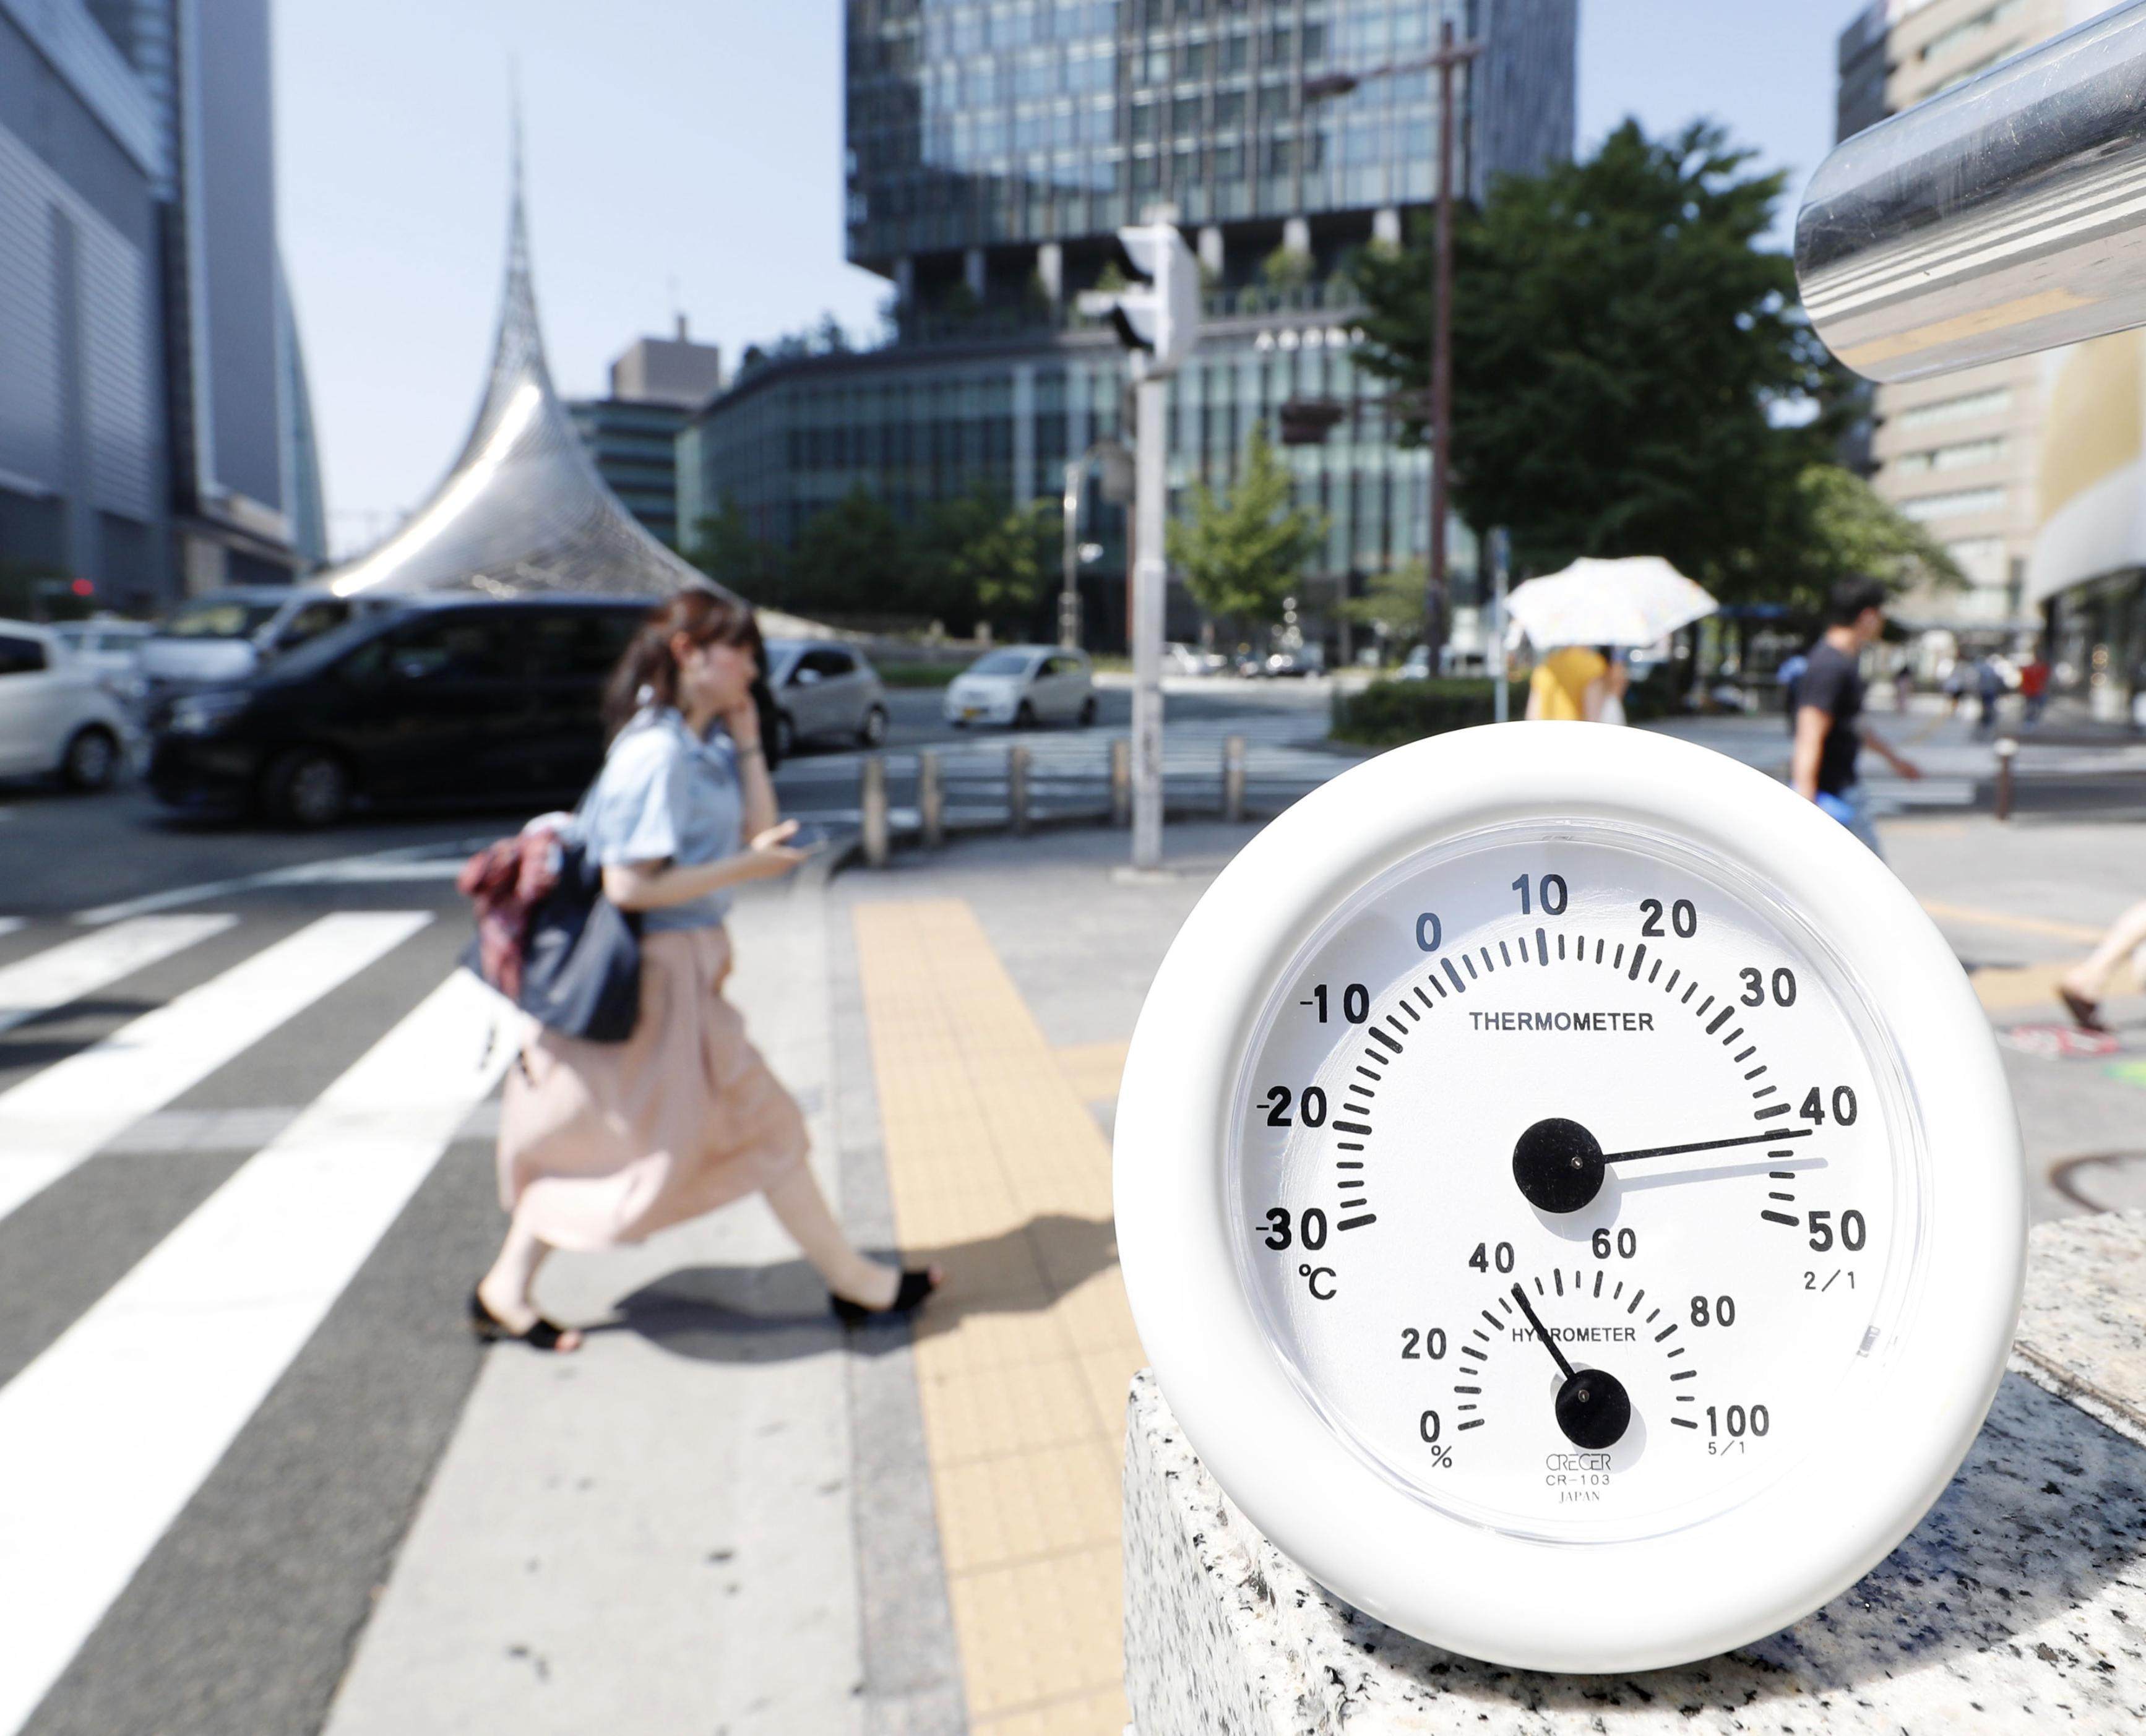 Japan is taking measures to help prevent deaths from heatstroke. Photo: Kyodo